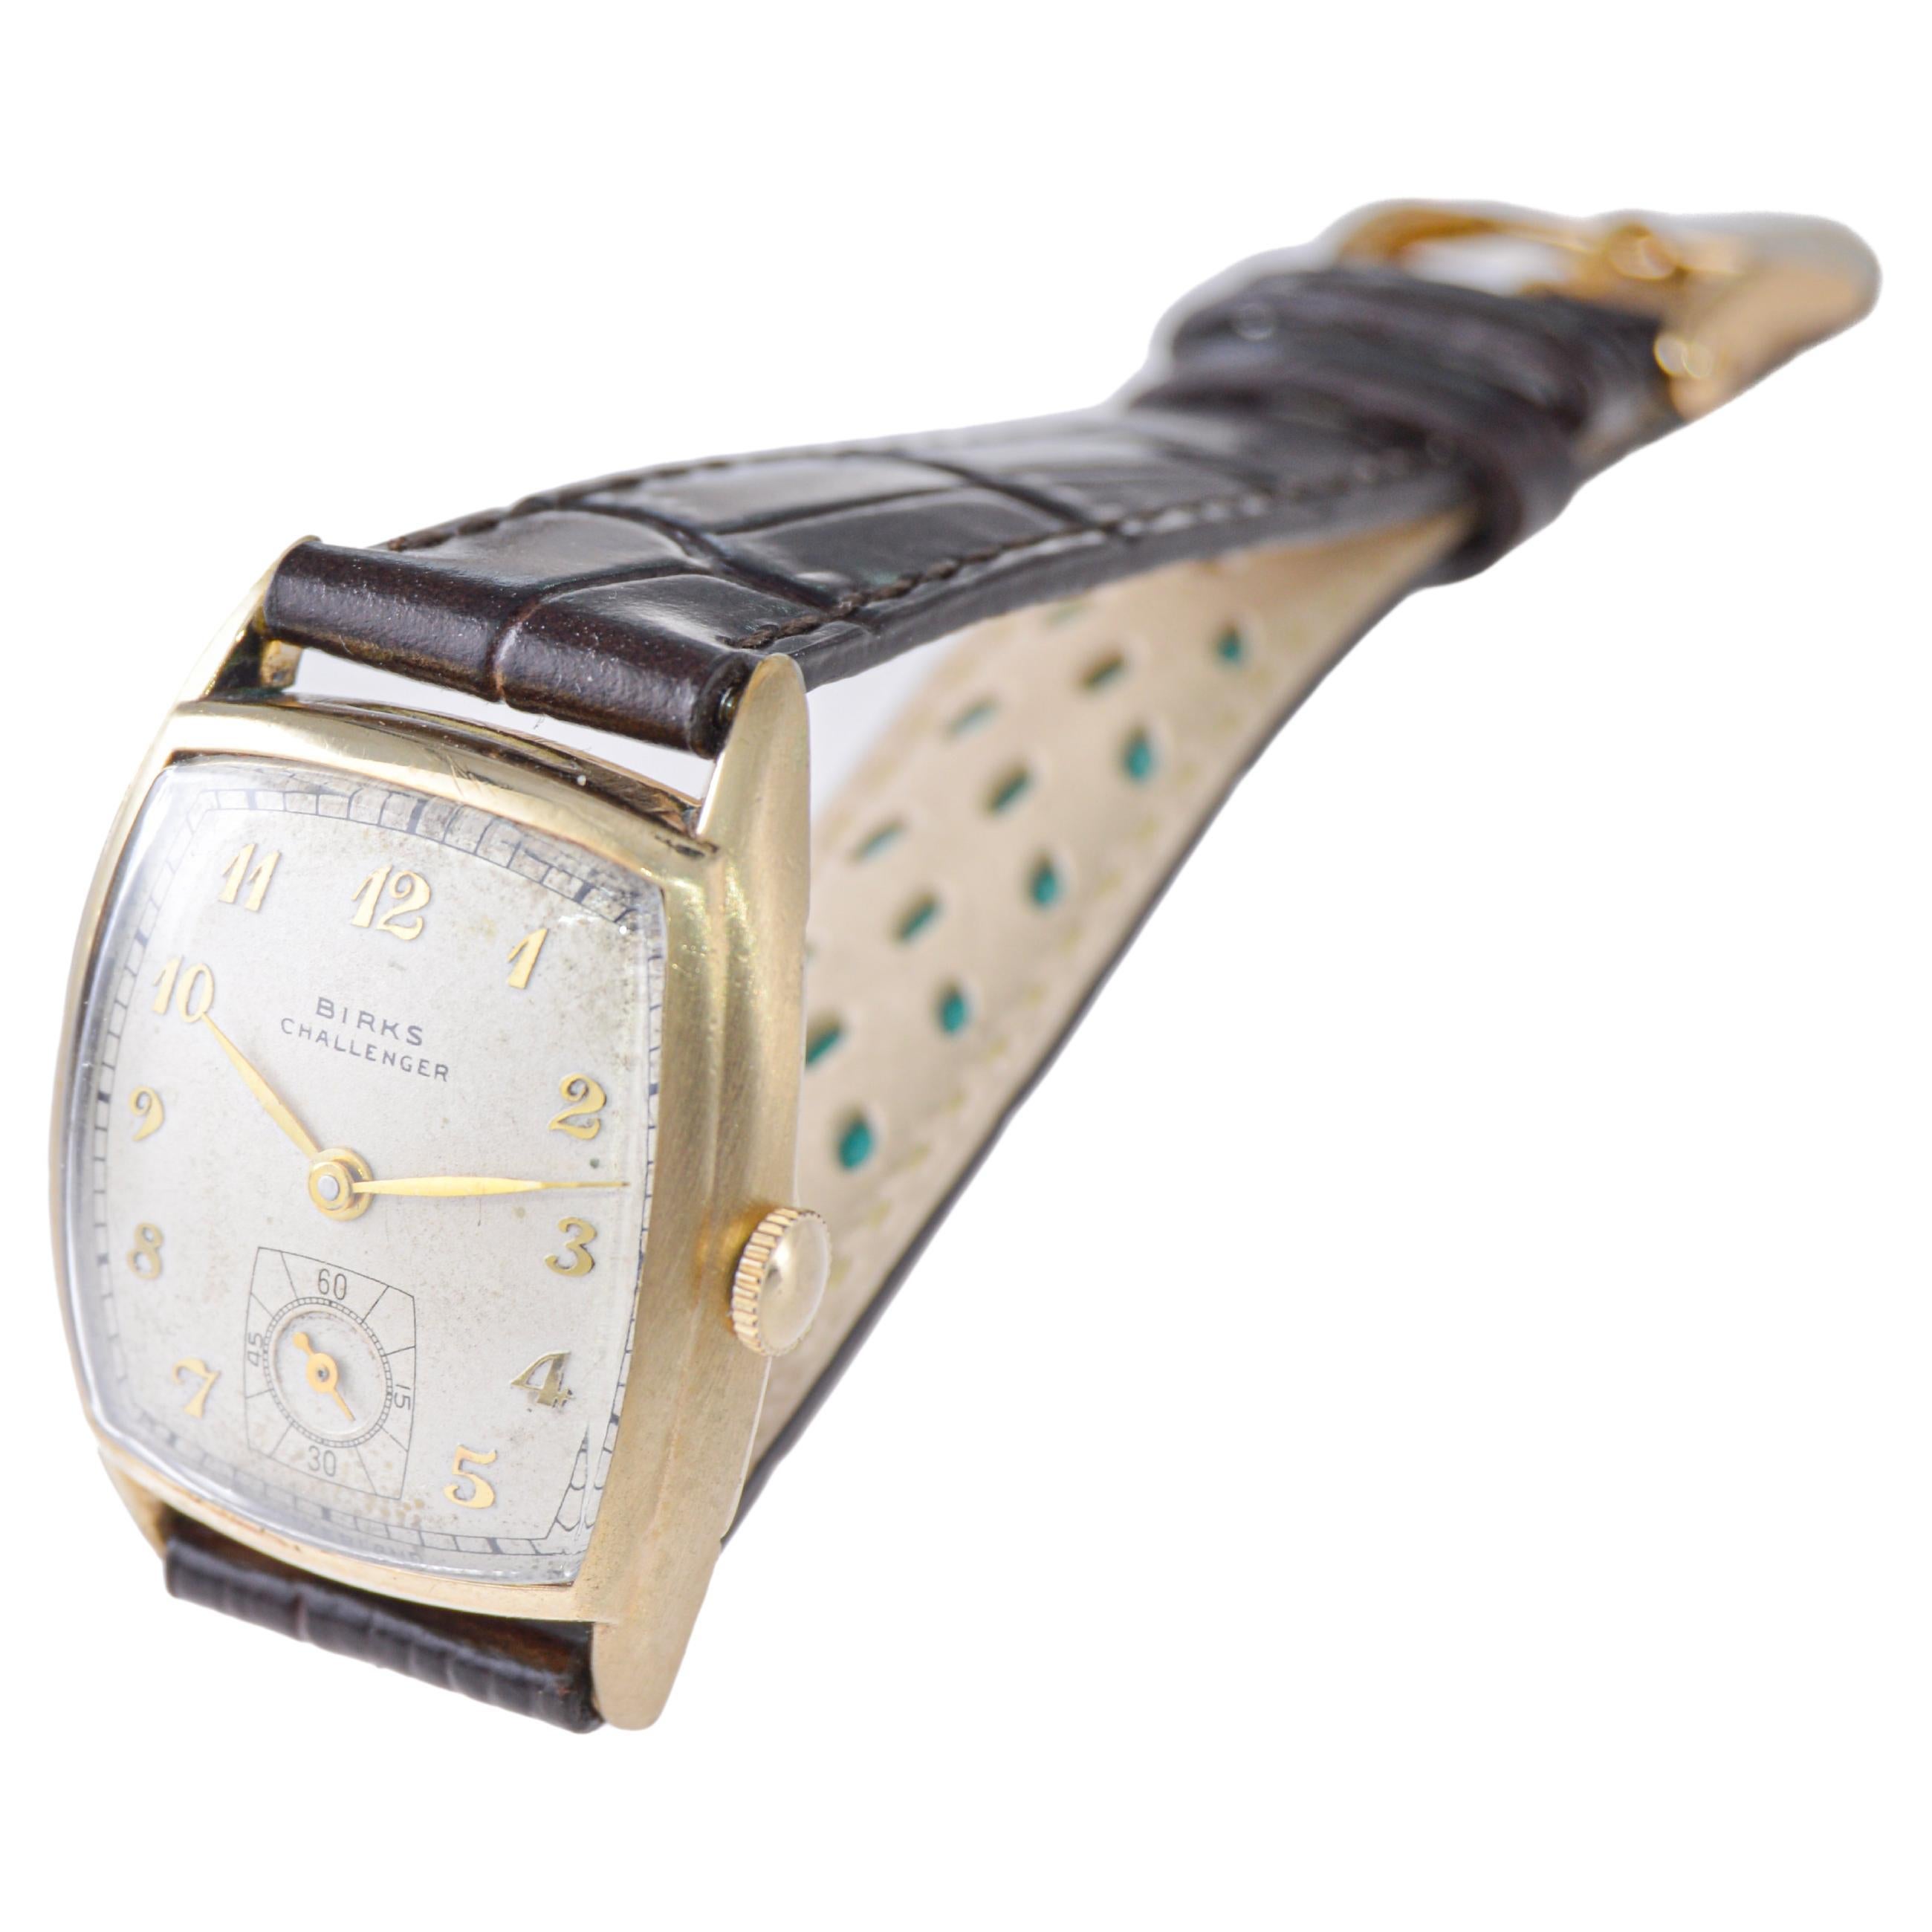 Birks Yellow Gold Filled Art Deco Tonneau Shaped Watch with Original Dial 1944 In Excellent Condition For Sale In Long Beach, CA